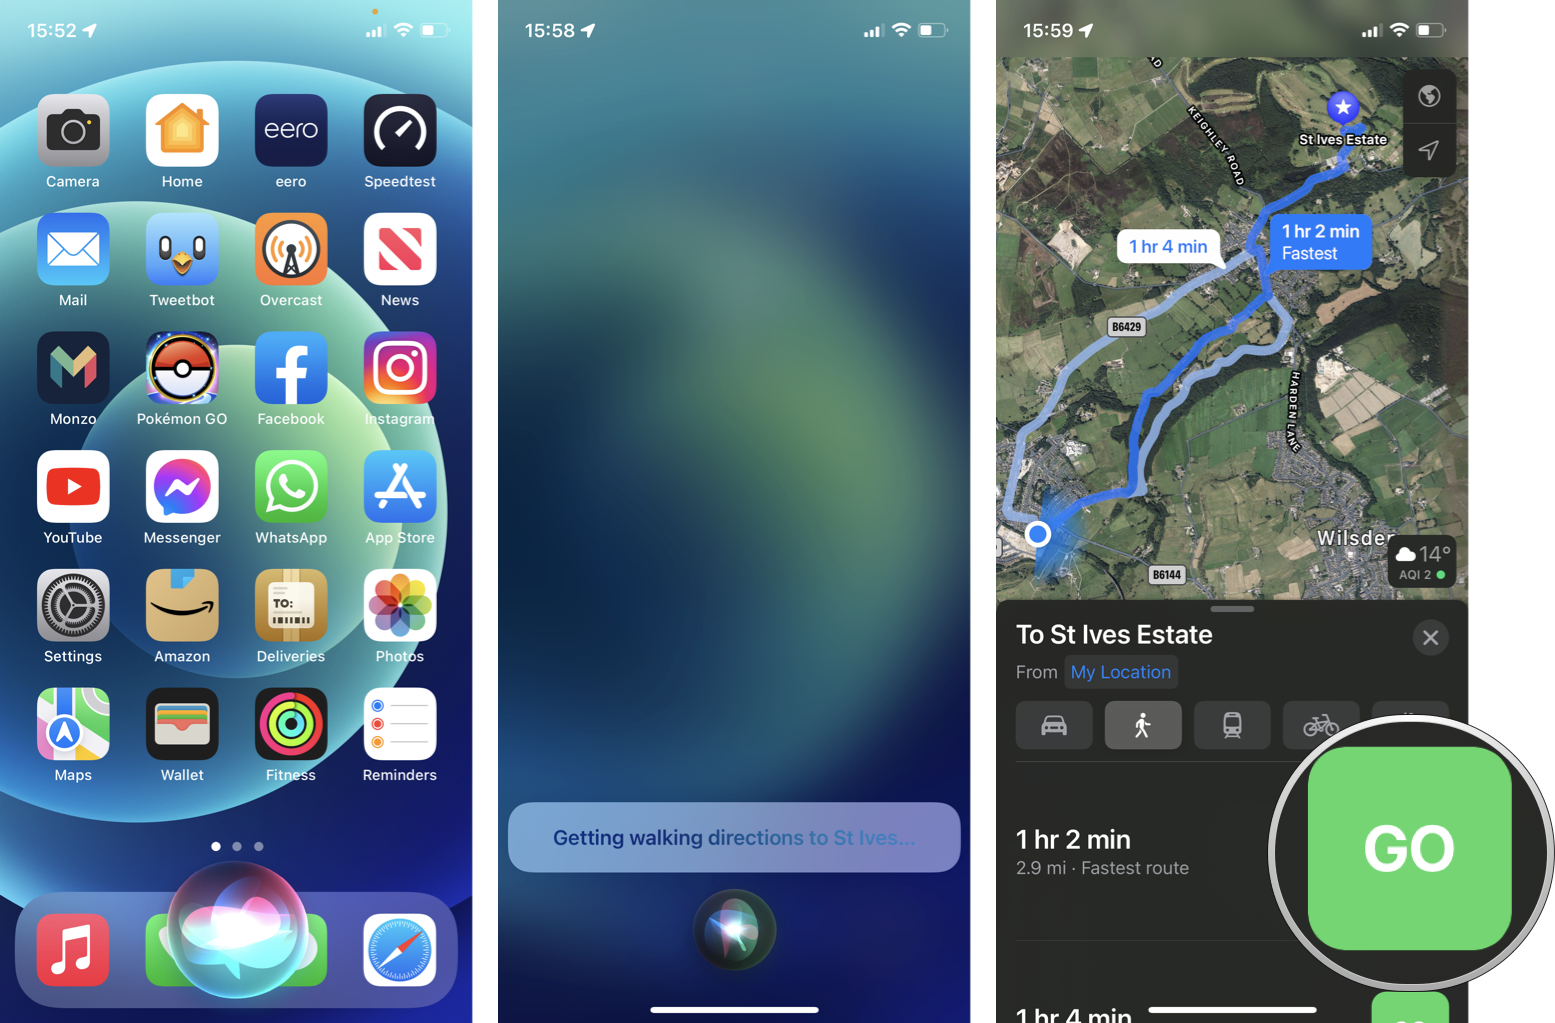 How To Get Walking Directions With Siri: Invoke Siri, ask for walking directions to the desired location, tap Go to begin navigation